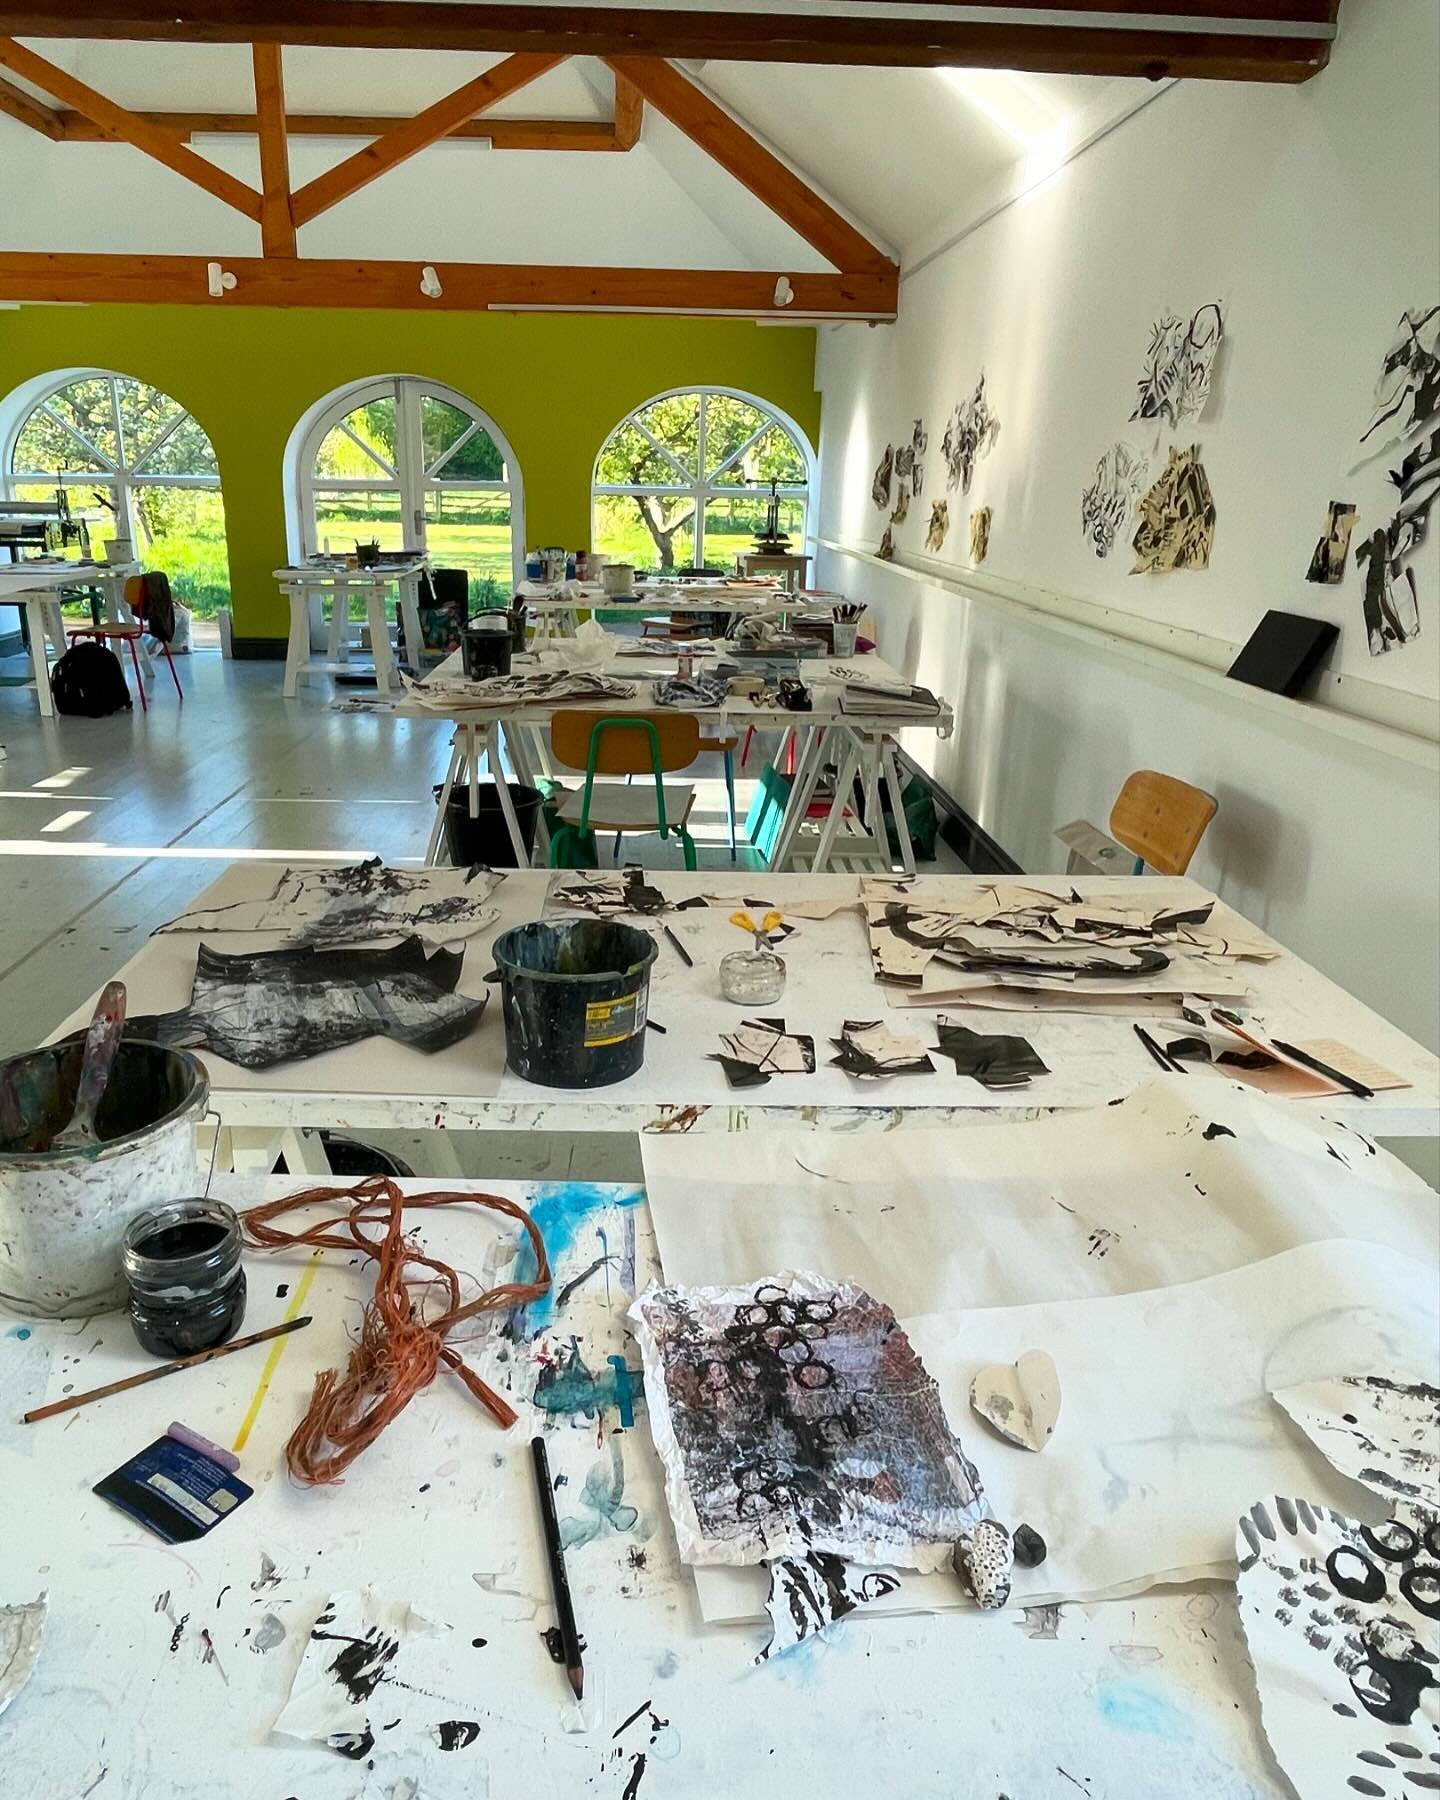 Early morning setting up for a second day with Matthew Harris - bold and beautiful mark making in the studio this week&hellip;

@matthewharriscloth #markmakingart